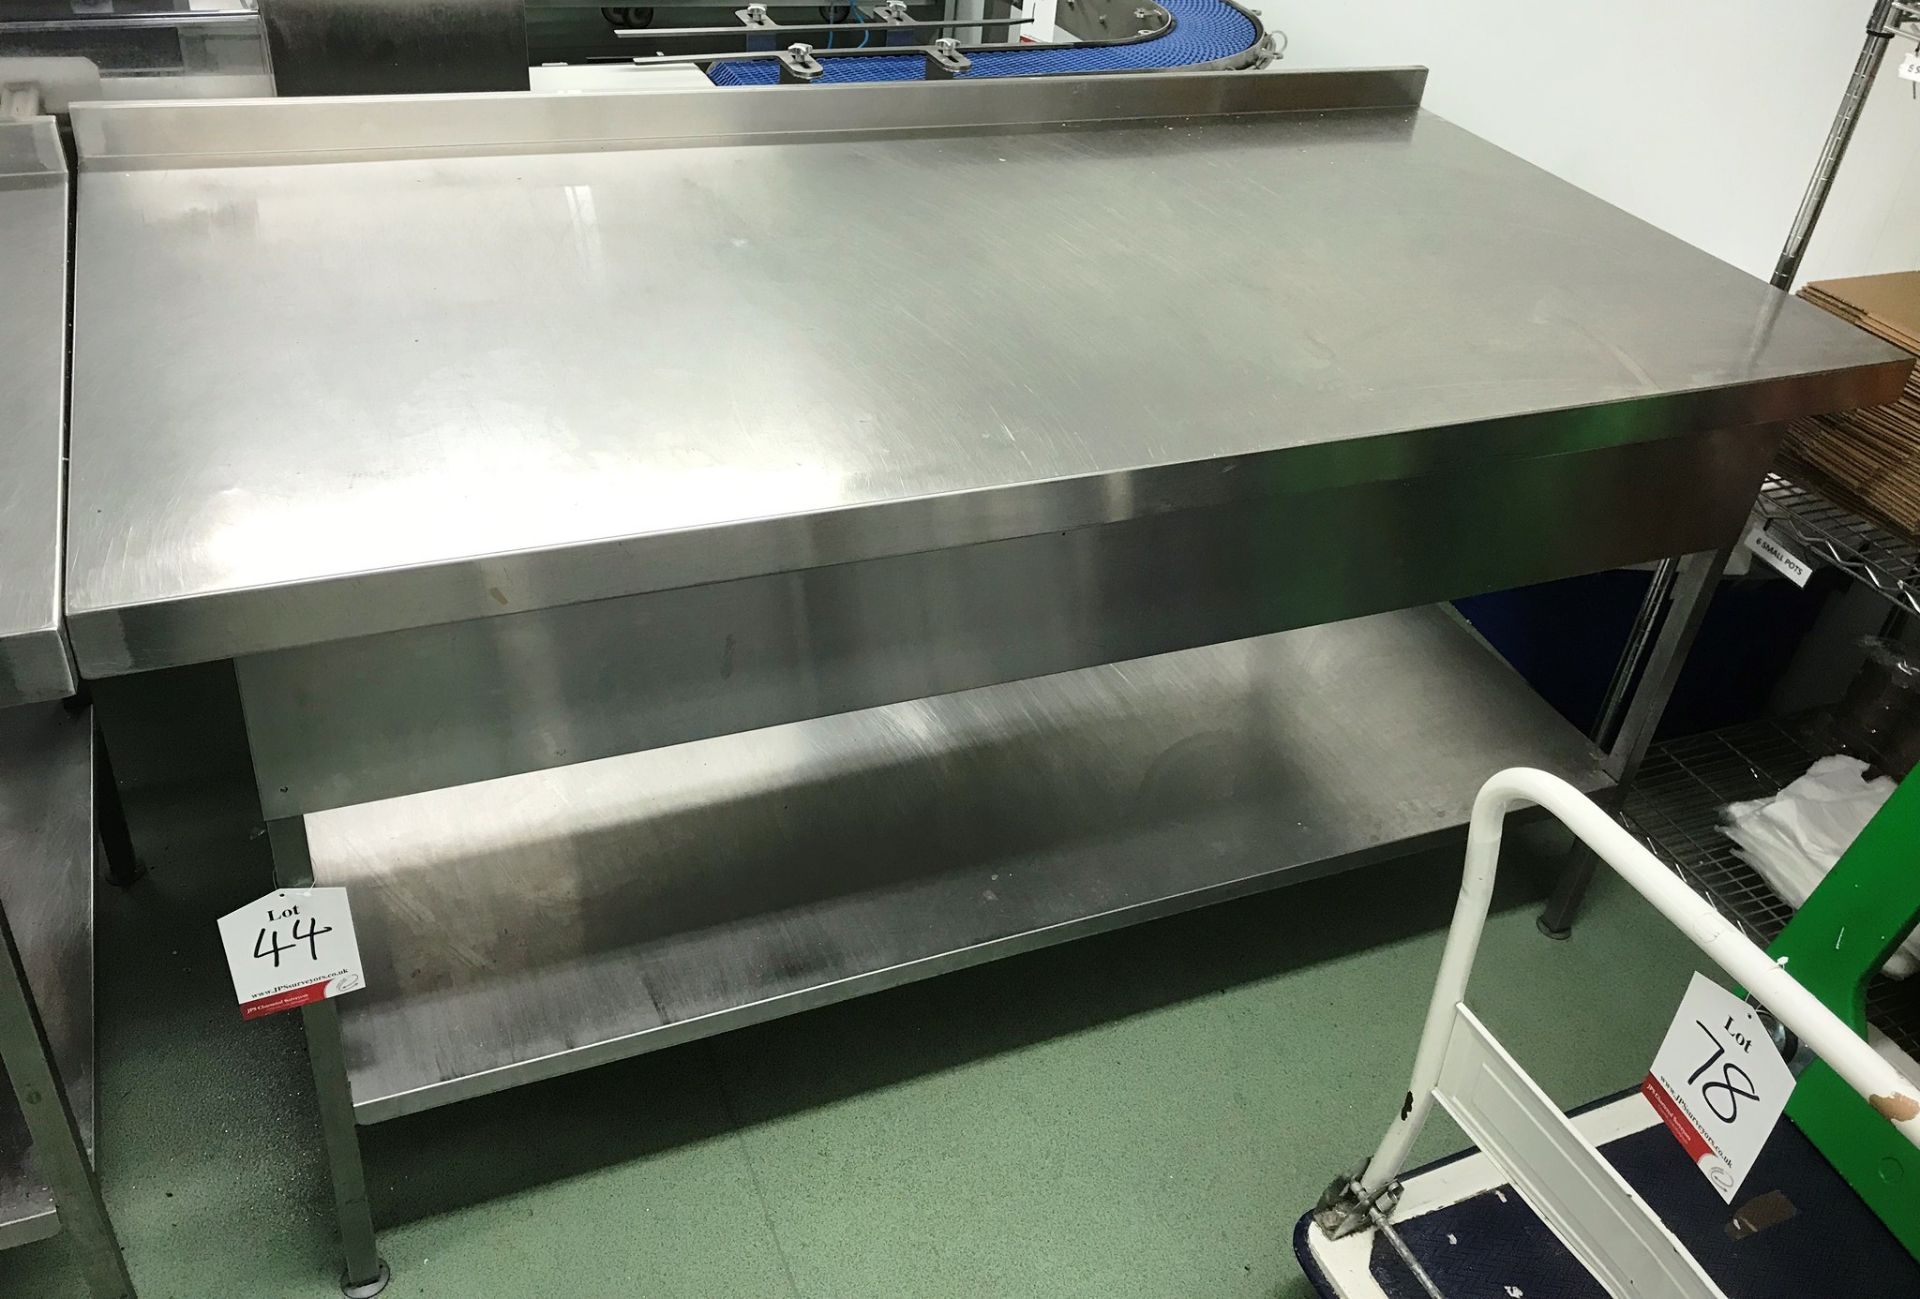 Stainless Steel Preparation Table w/ Undershelf & Upstand - 1900mm Length